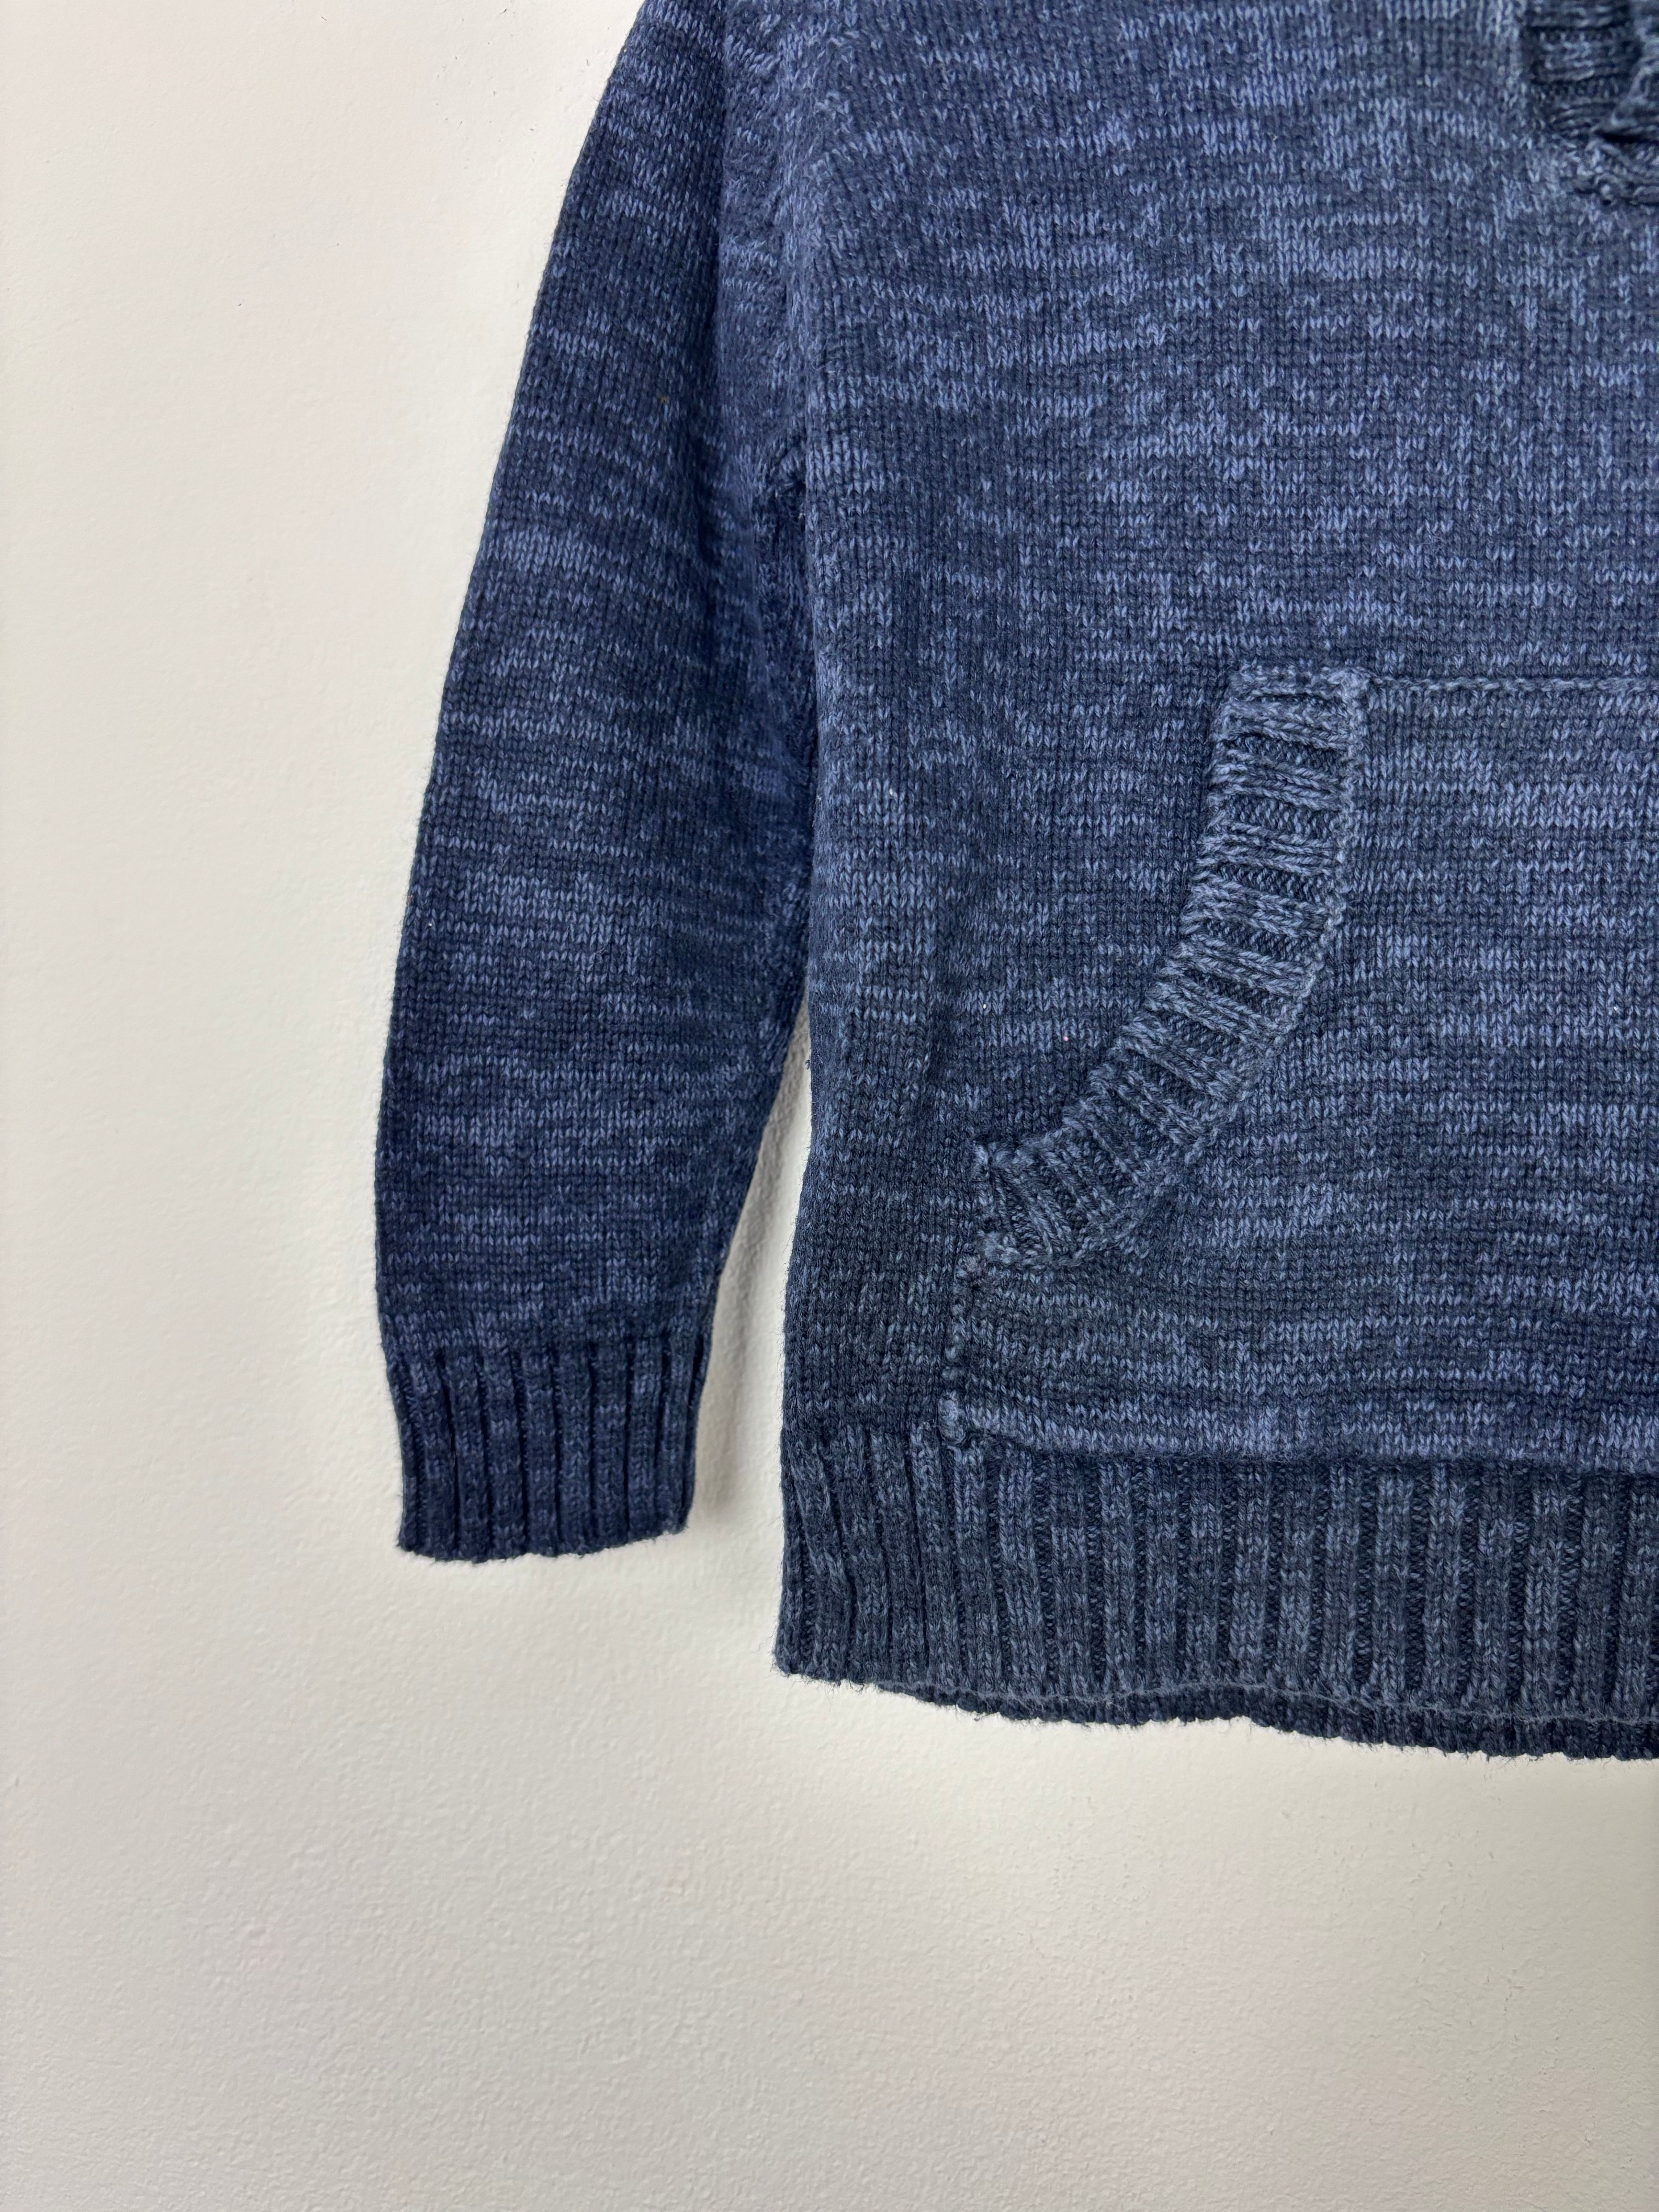 DKNY 18 Months-Jumpers-Second Snuggle Preloved